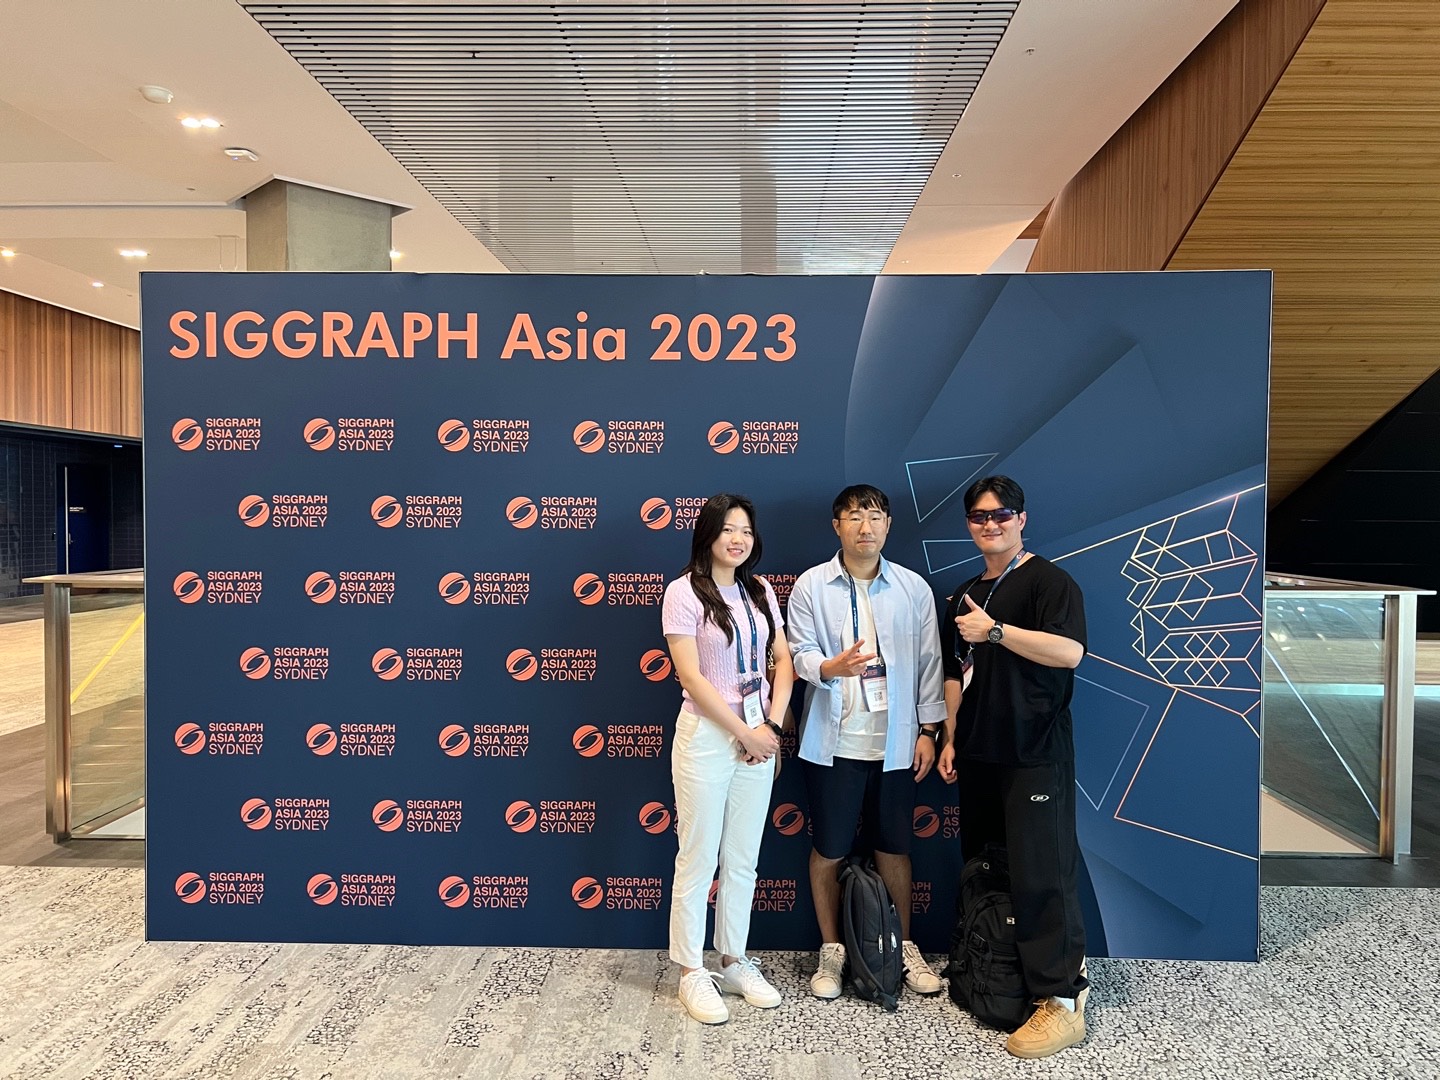 Jonghee presented a paper at SIGGRAPH Asia 2023